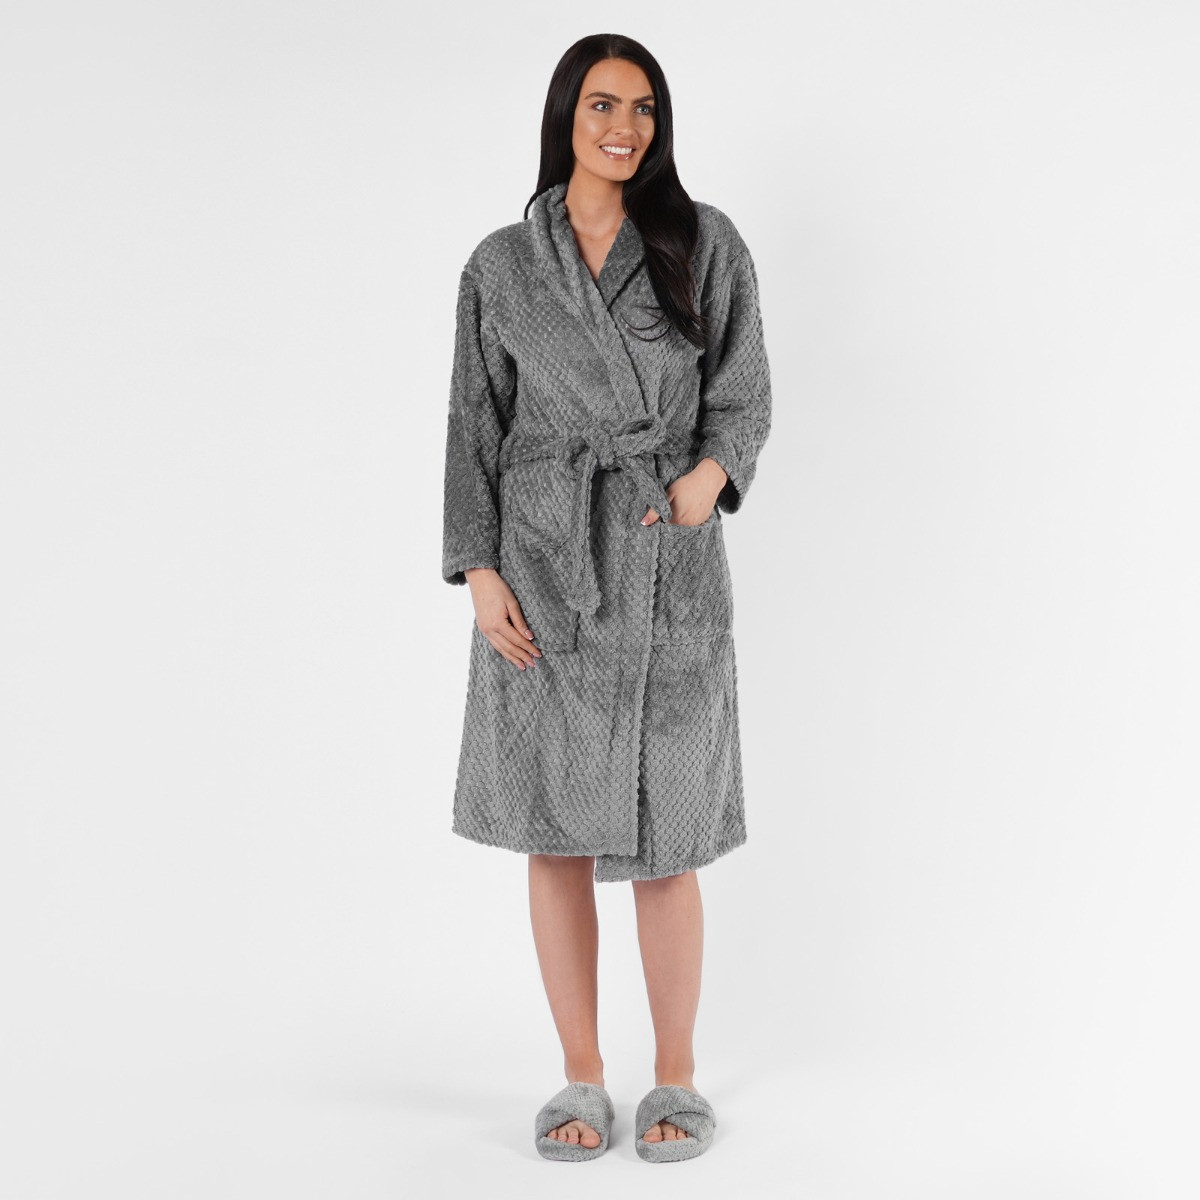 Brentfords Waffle Fleece Dressing Gown, One Size - Charcoal